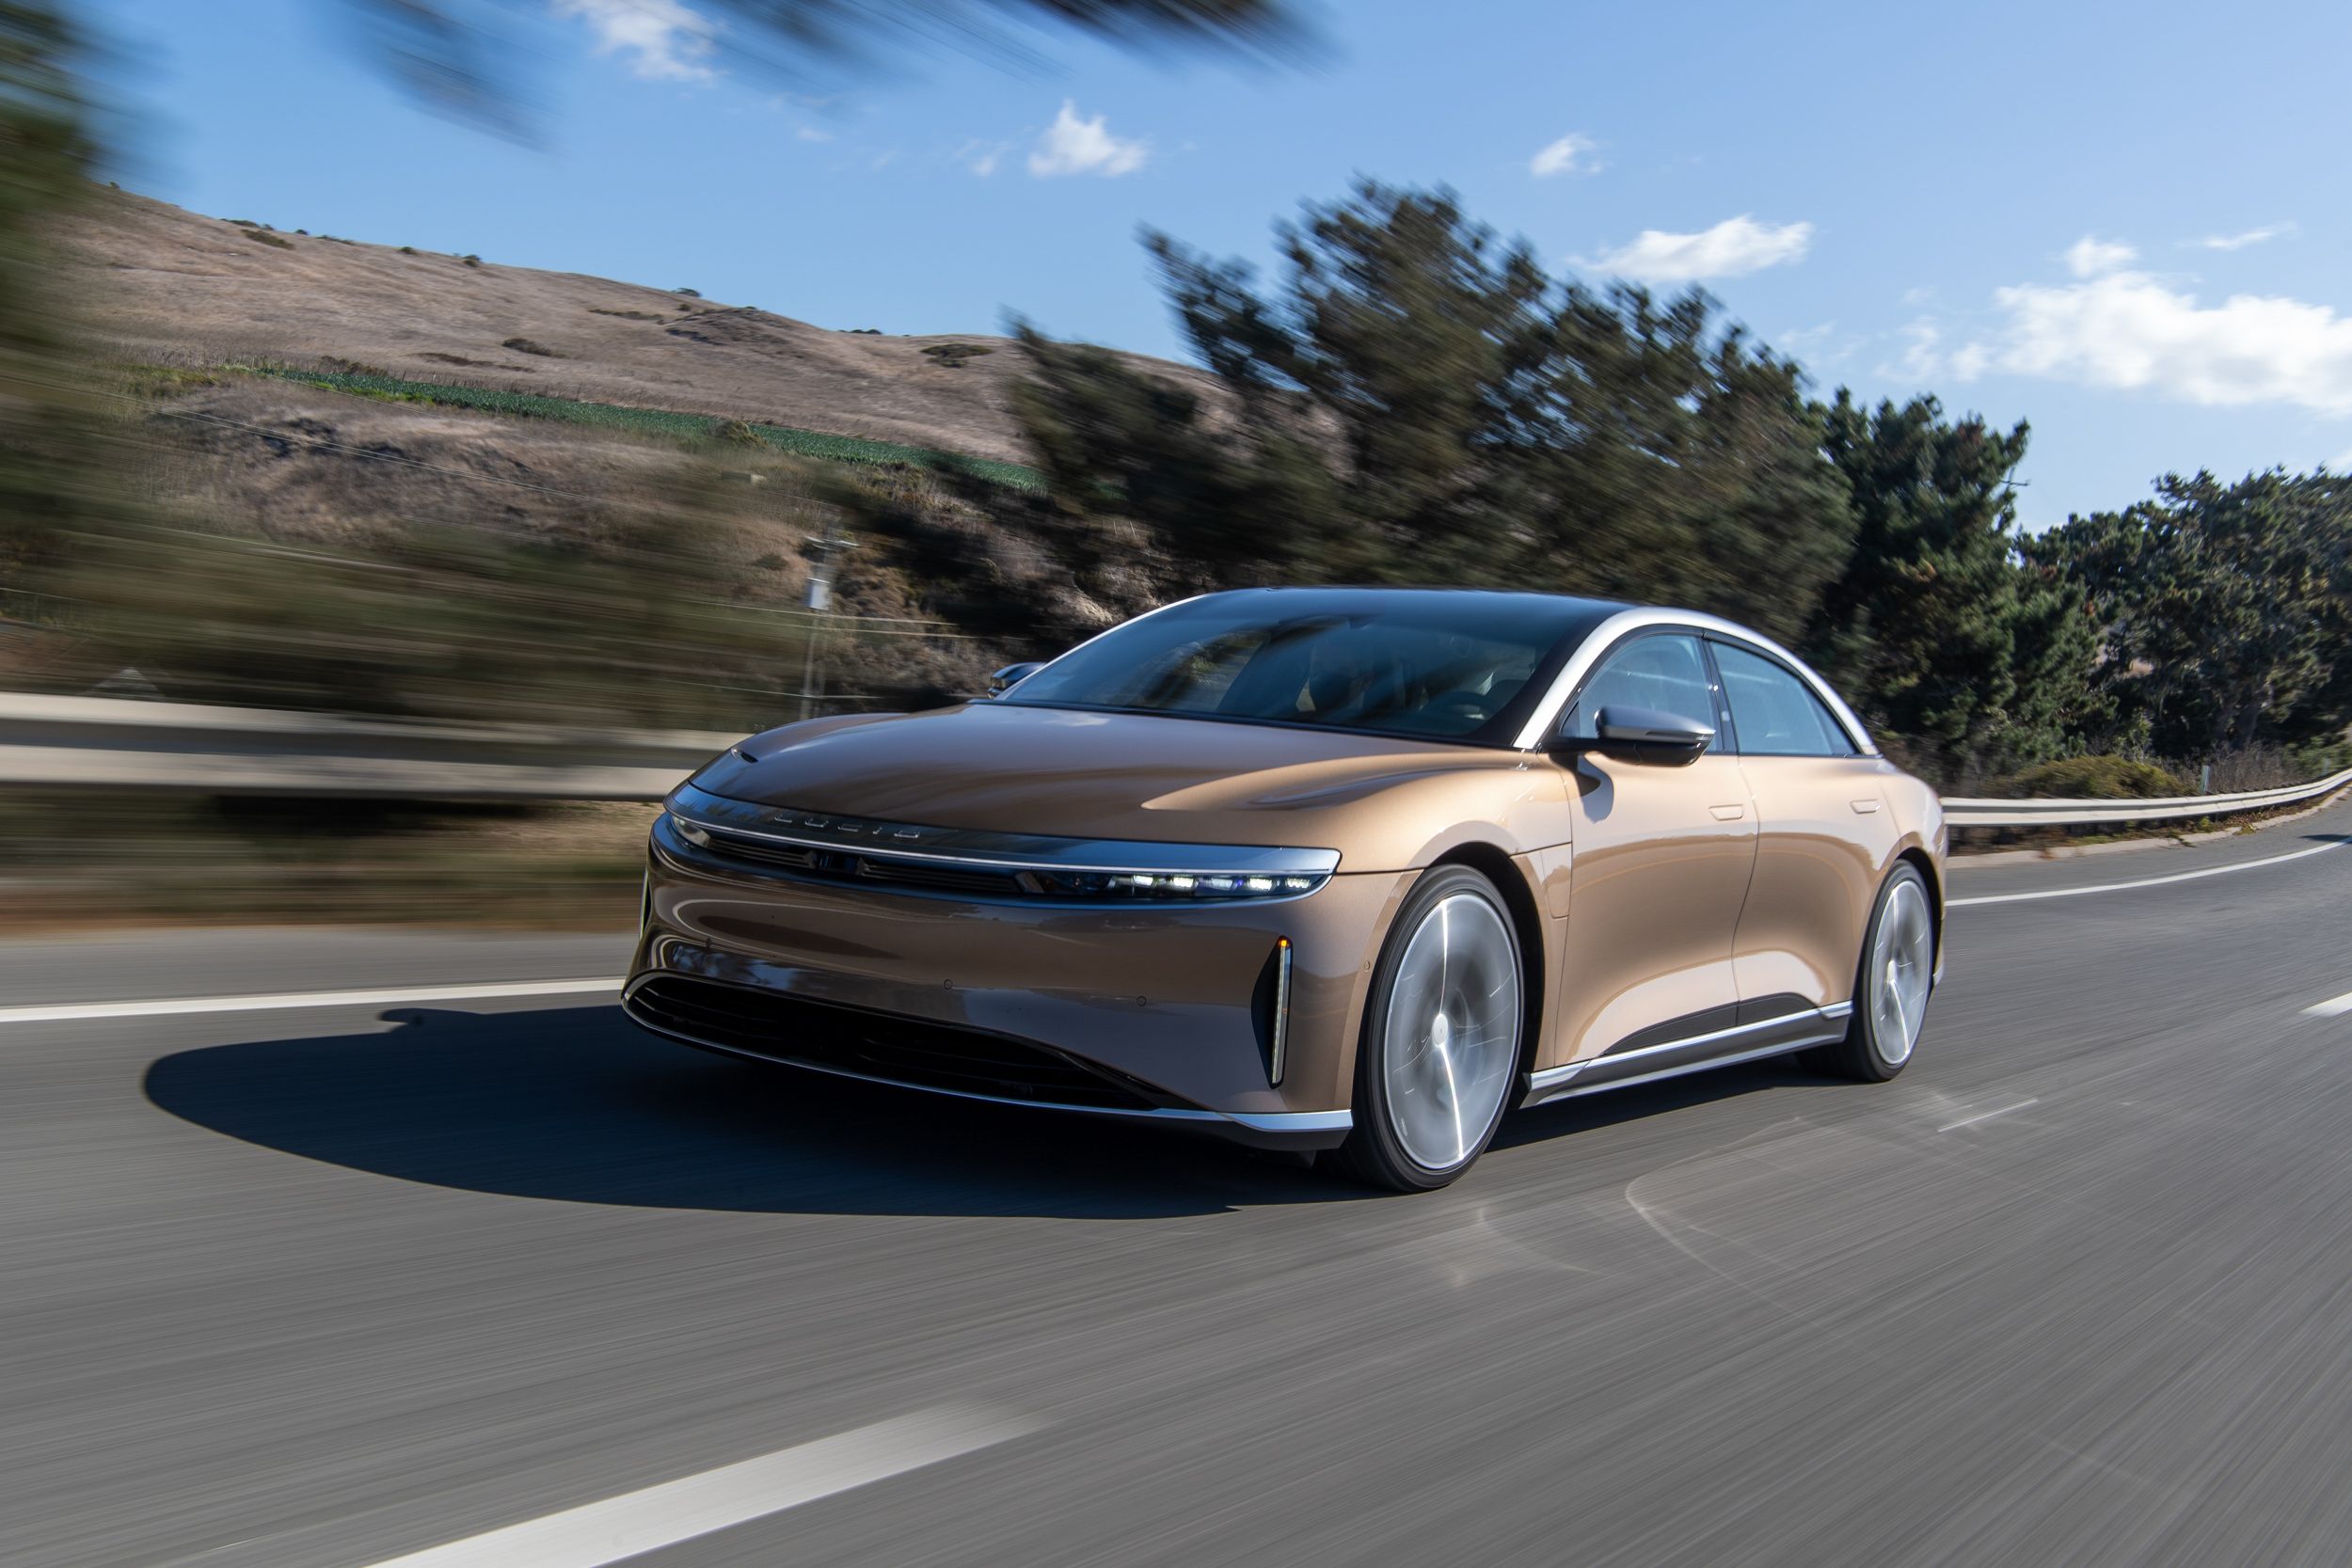 2022 Lucid Air Dream Edition Turns It Up to 1111